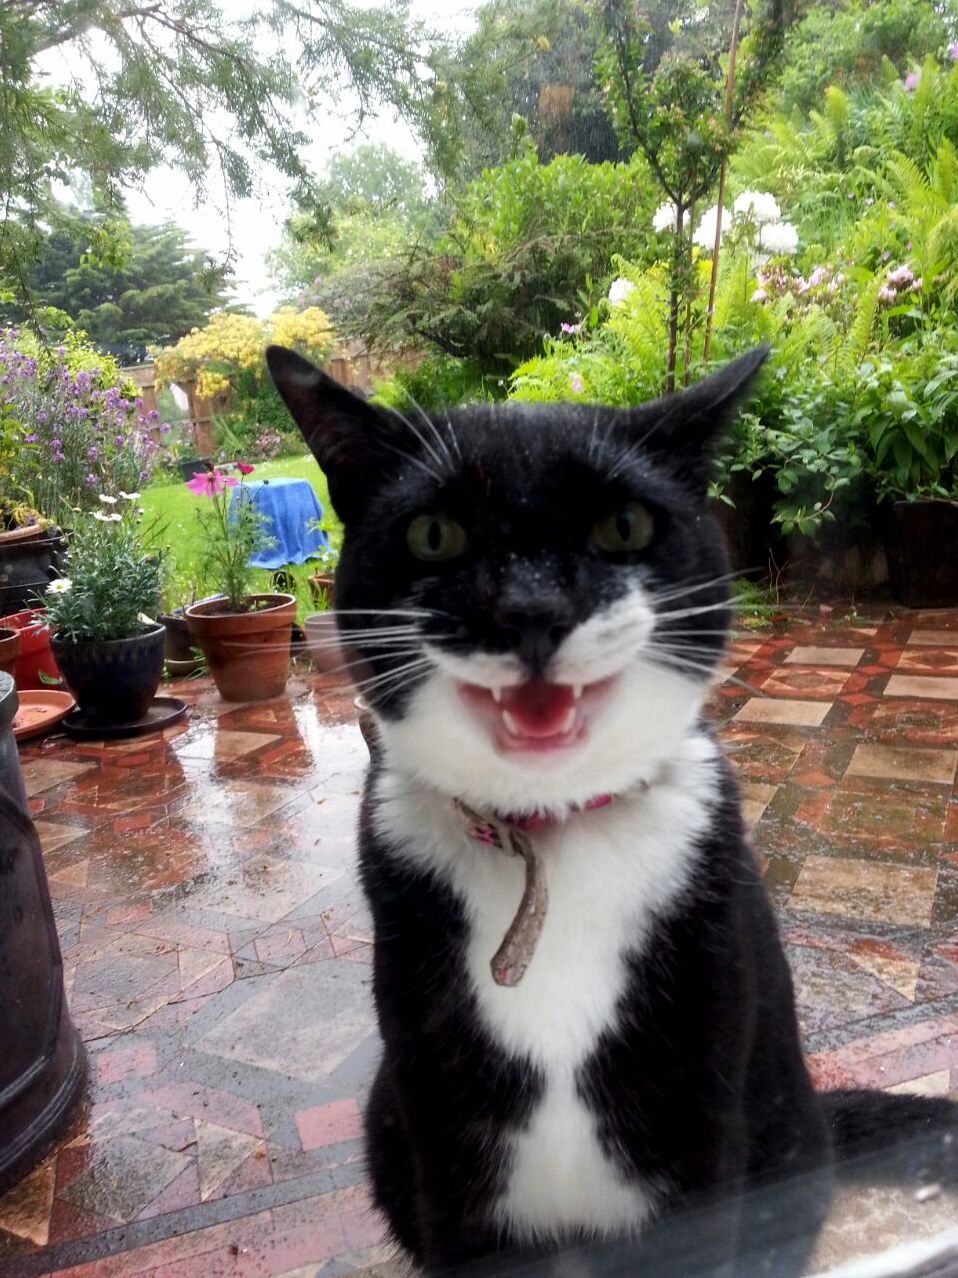 My cats face when he realised i was going to take a photo of him through the window before letting him come inside from the rain.